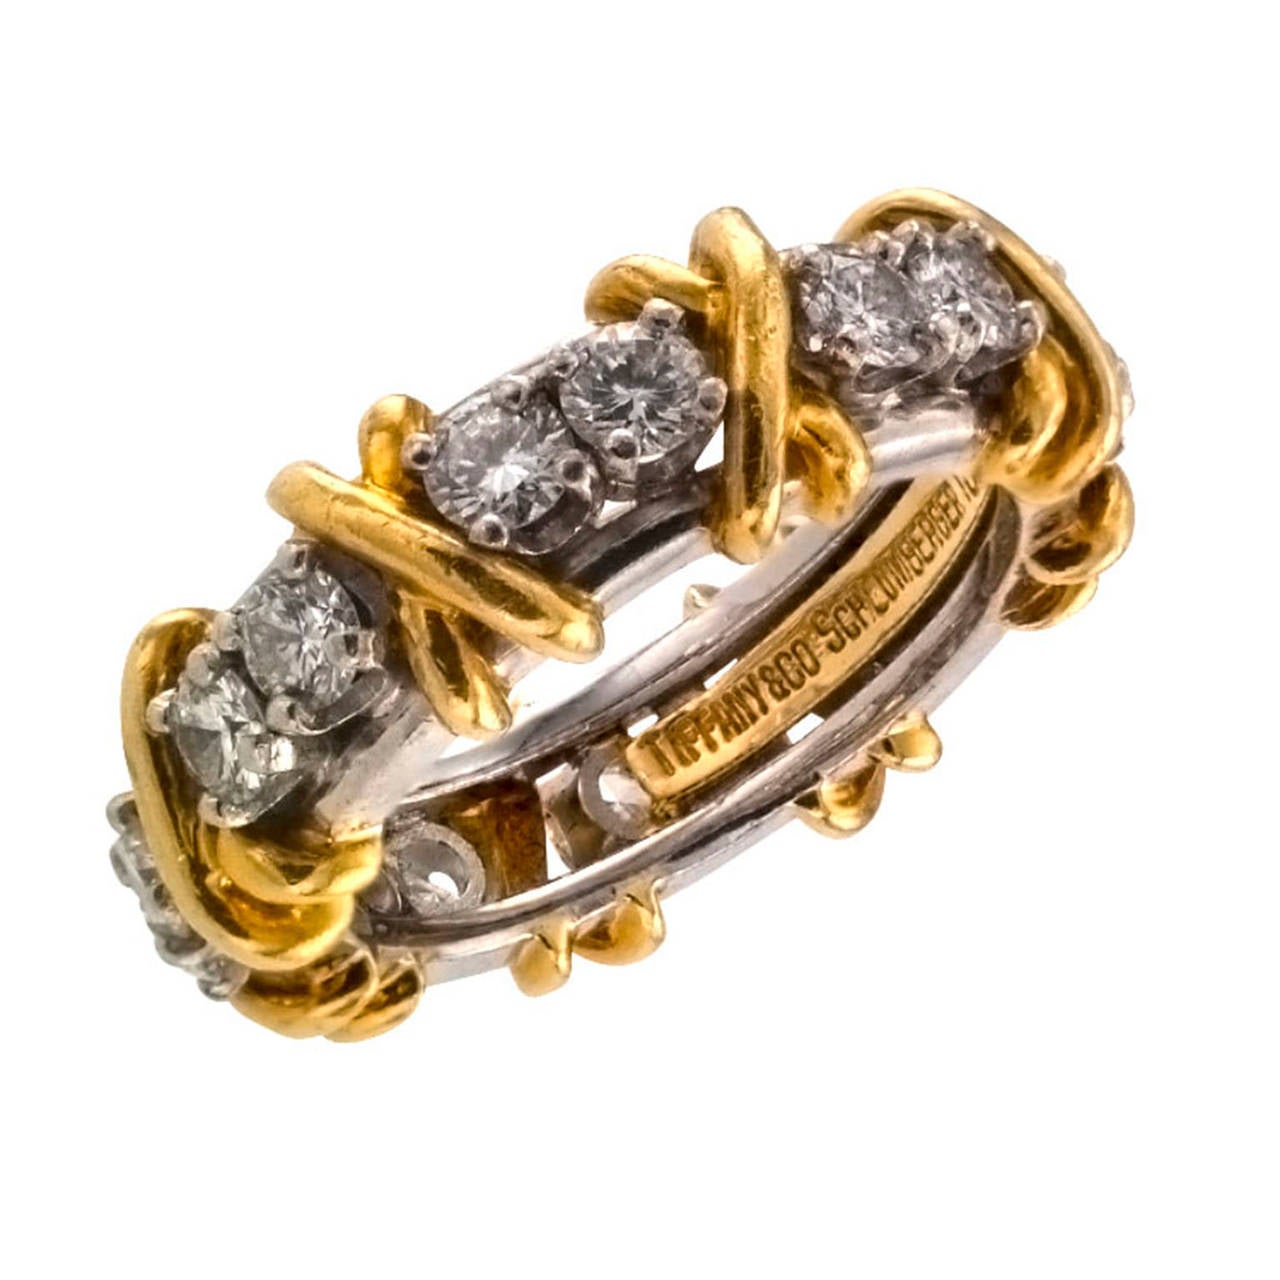 Tiffany & Co. Schlumberger 16 Stone Eternity band

A popular and classic design by one of Tiffany & Co.'s most famous designers.  Eight pairs of diamonds, you and I repeated eight times between golden X's, the sixteen diamonds totaling